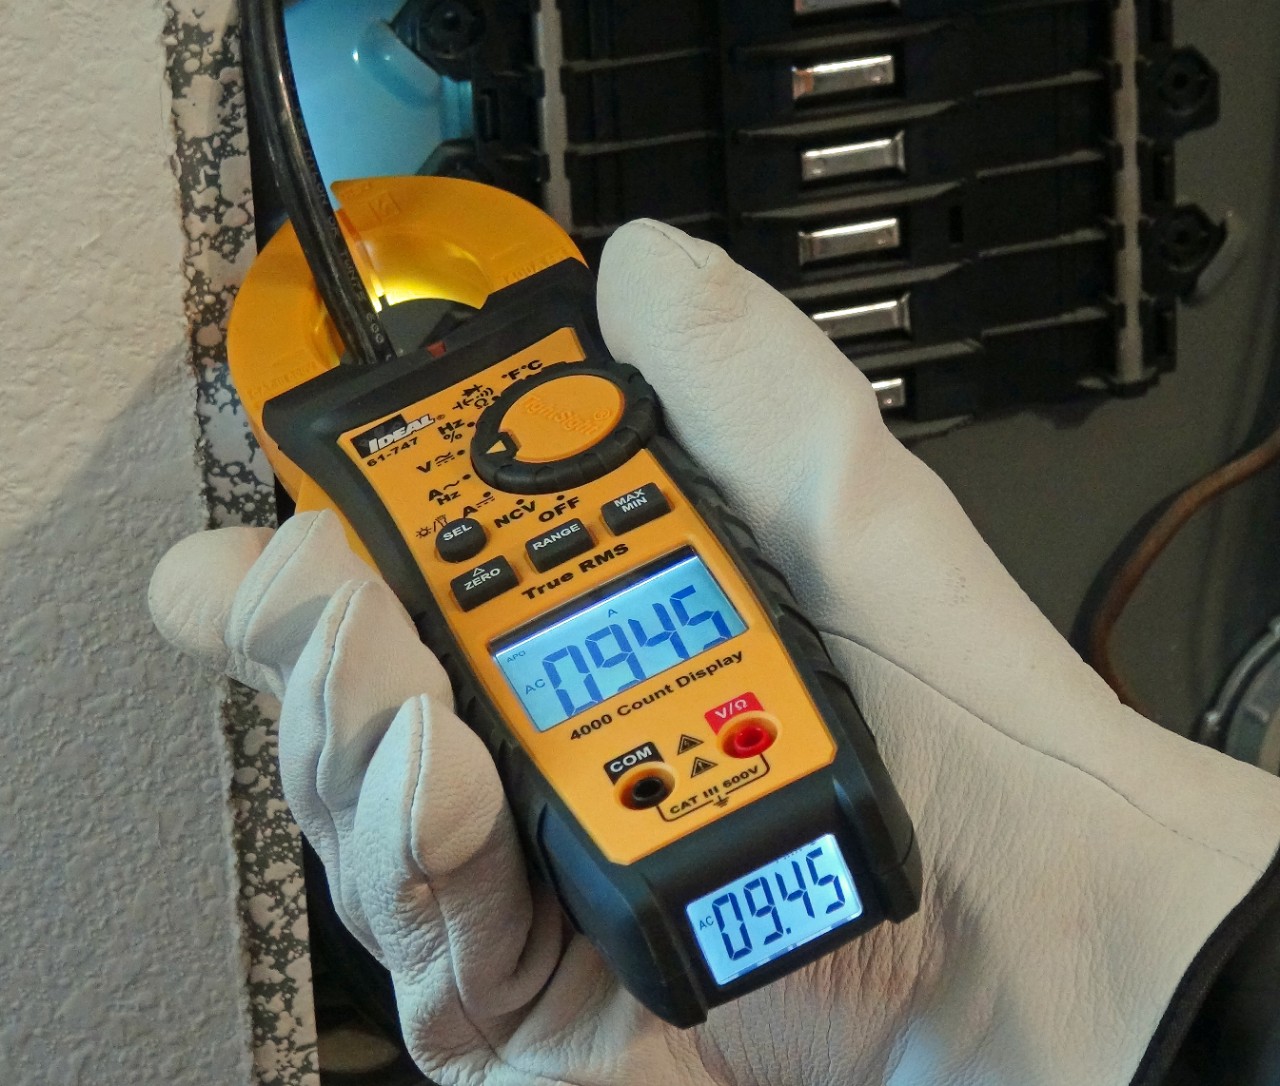 61-747 400A AC/DC TRMS Clamp Meter with TightSight Display, torch  and non-contact voltage test function plus temperature